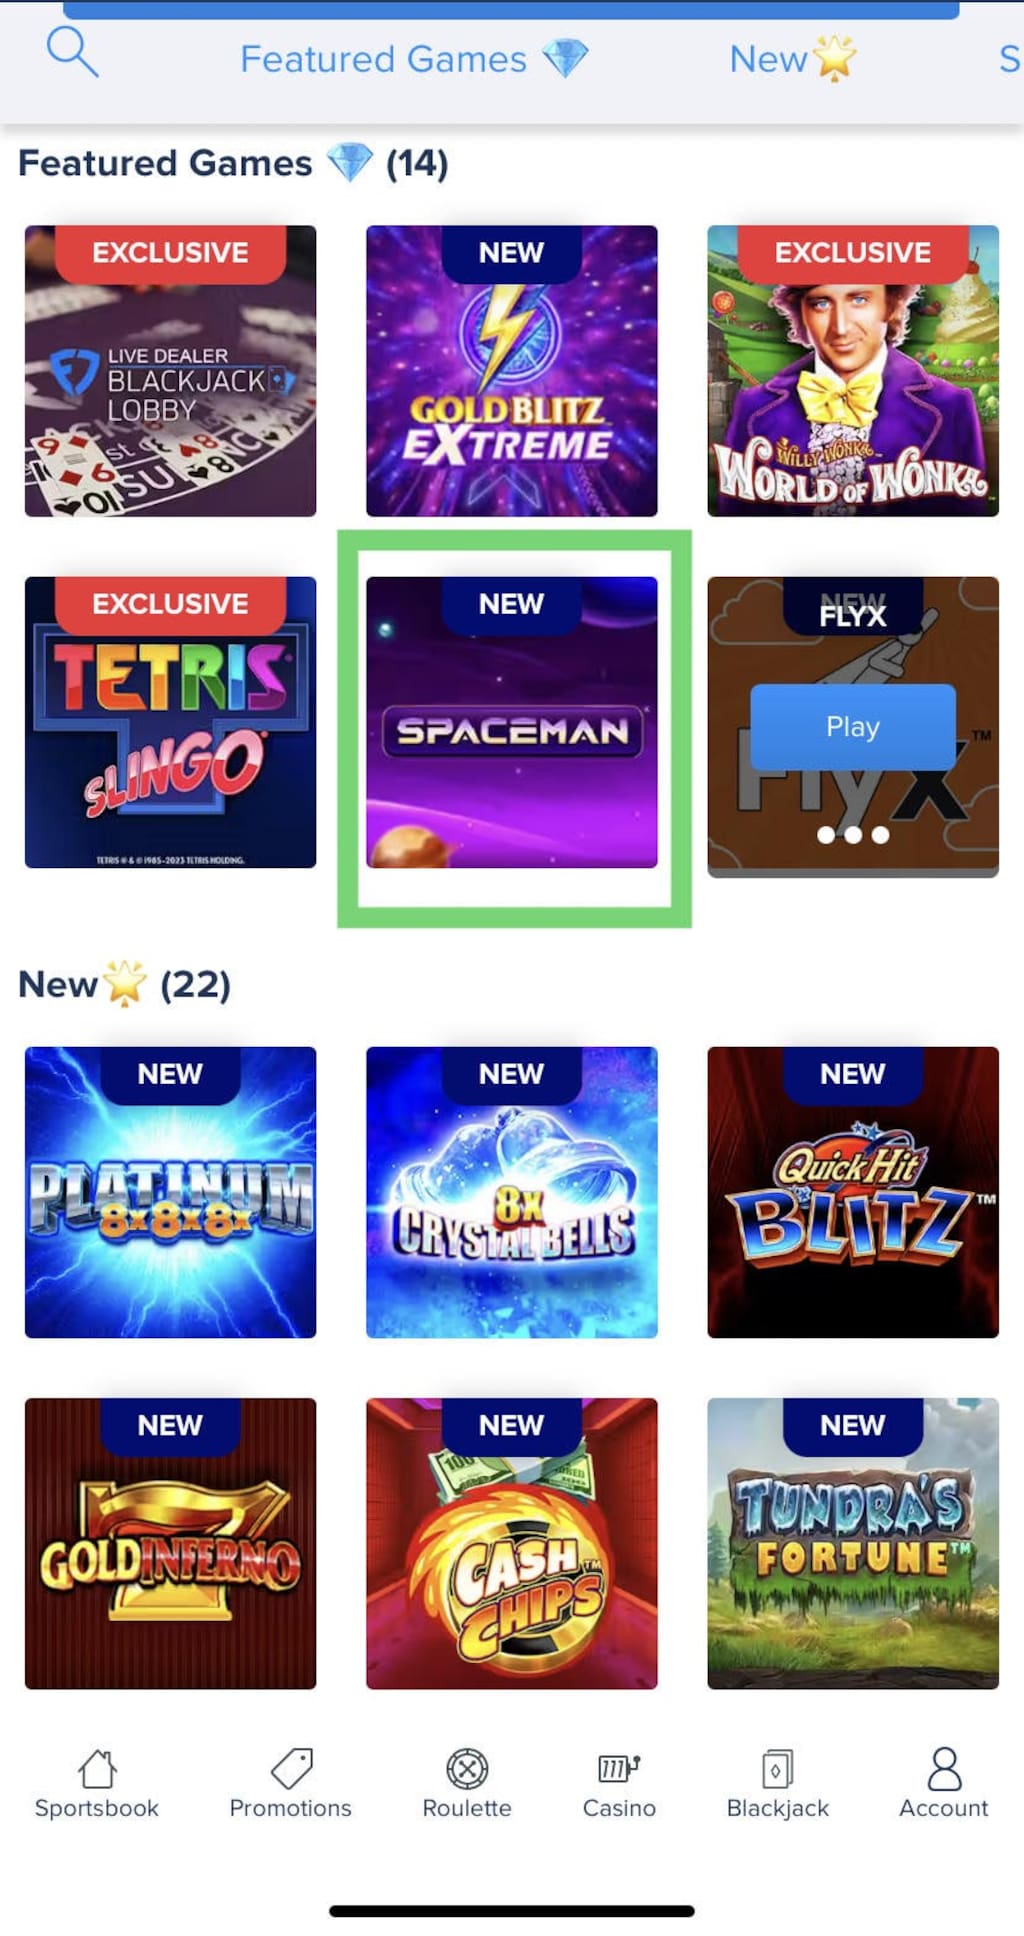 FanDuel Casino game Spaceman located under Featured Games section